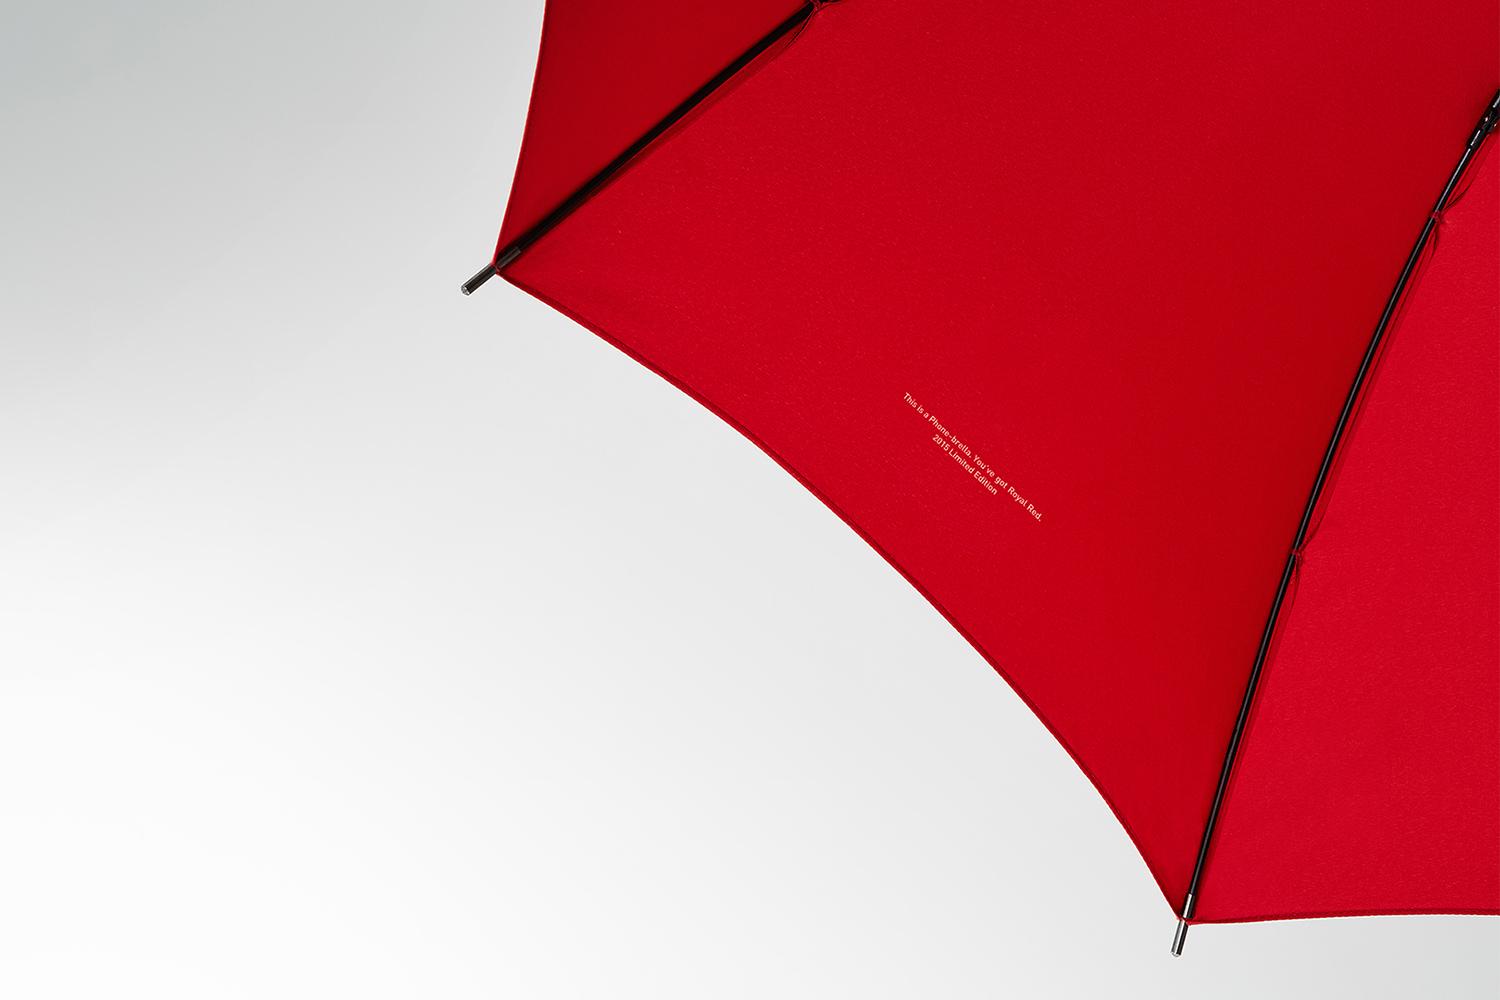 the phone brella allows you to text whatever is really not that important in rain kt designs 12